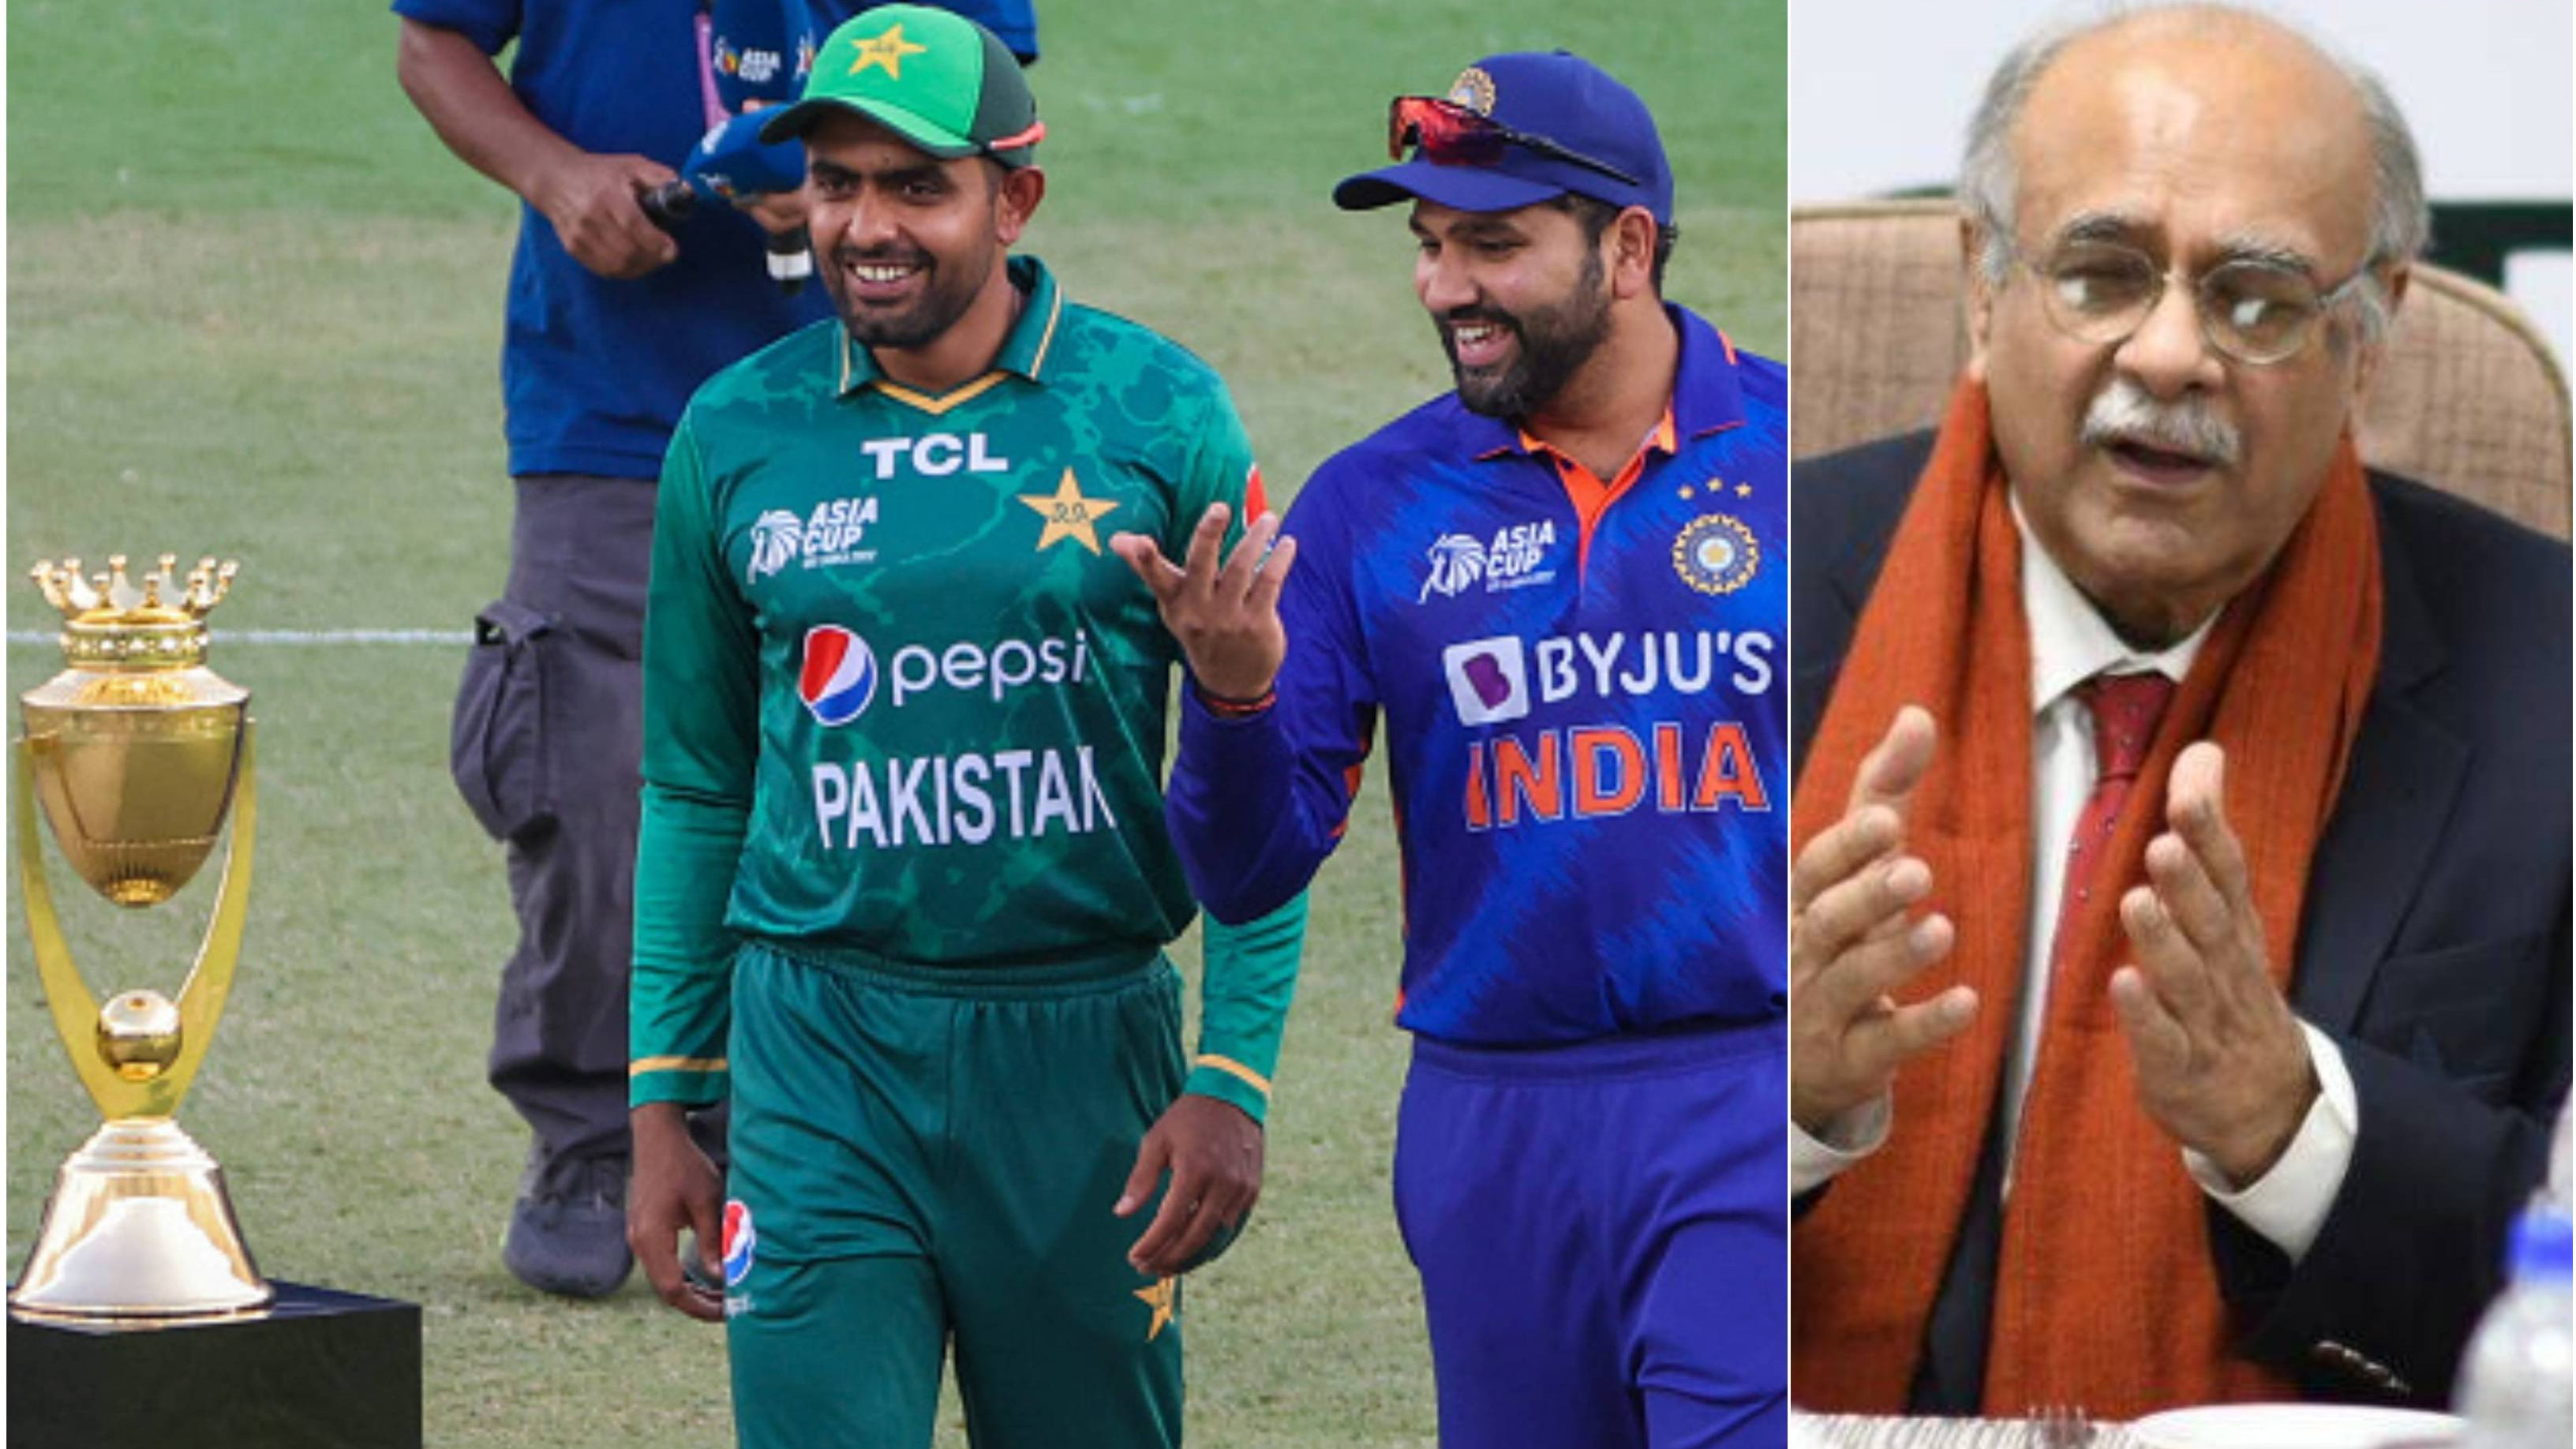 “No such matters were raised in meeting,” PCB issues statement amid reports on Asia Cup 2023 venue shift 